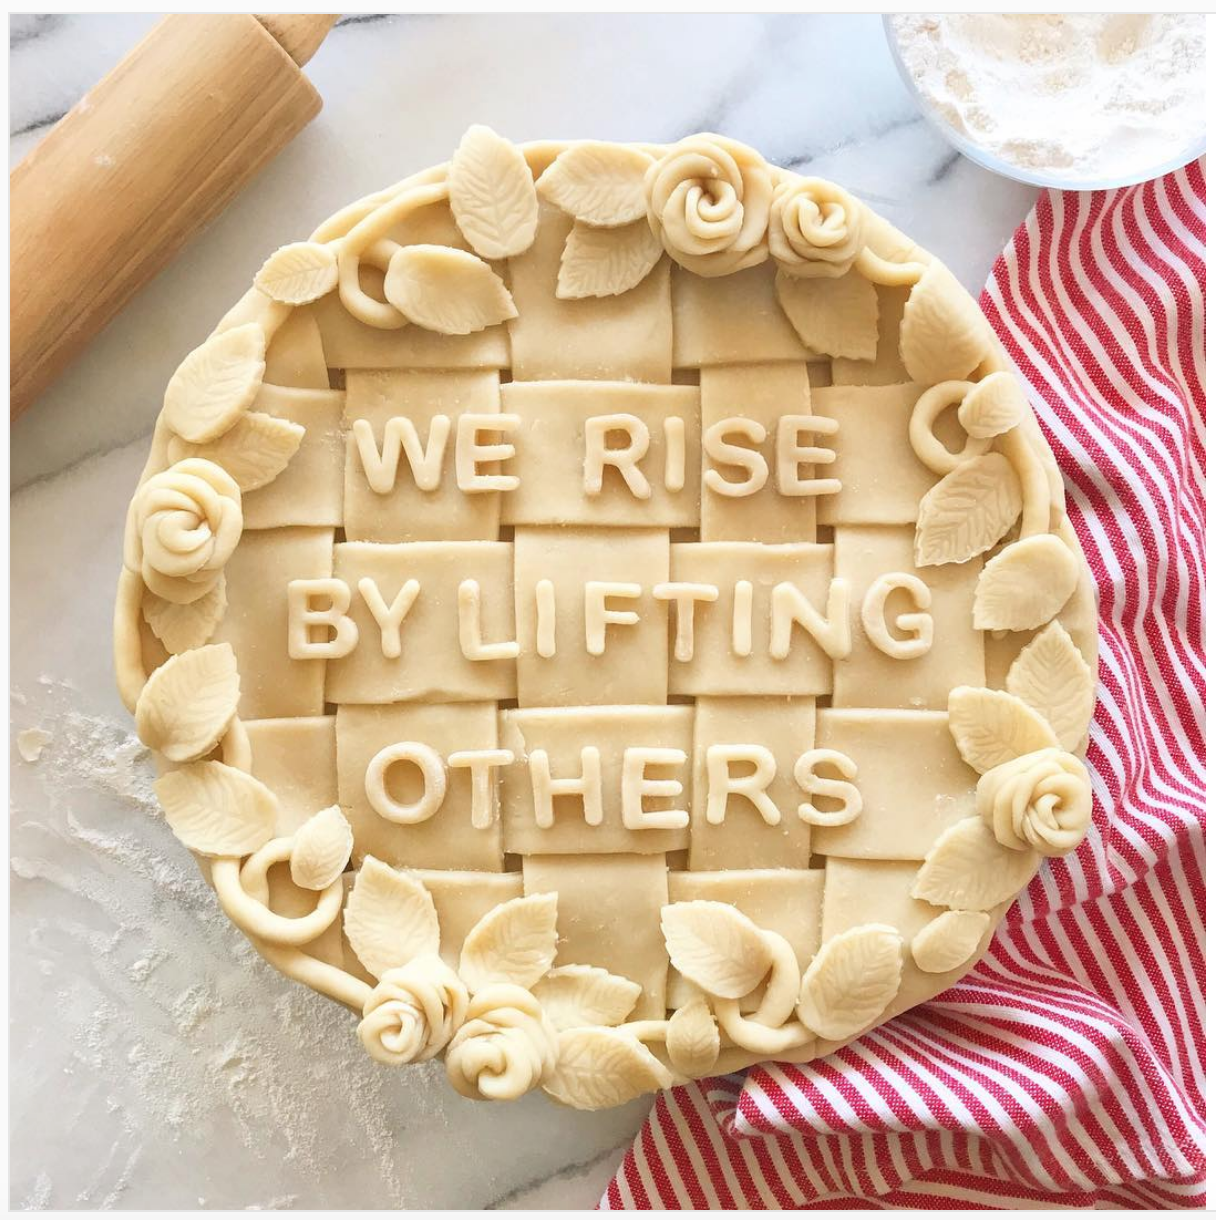 Pie: We rise by lifting others